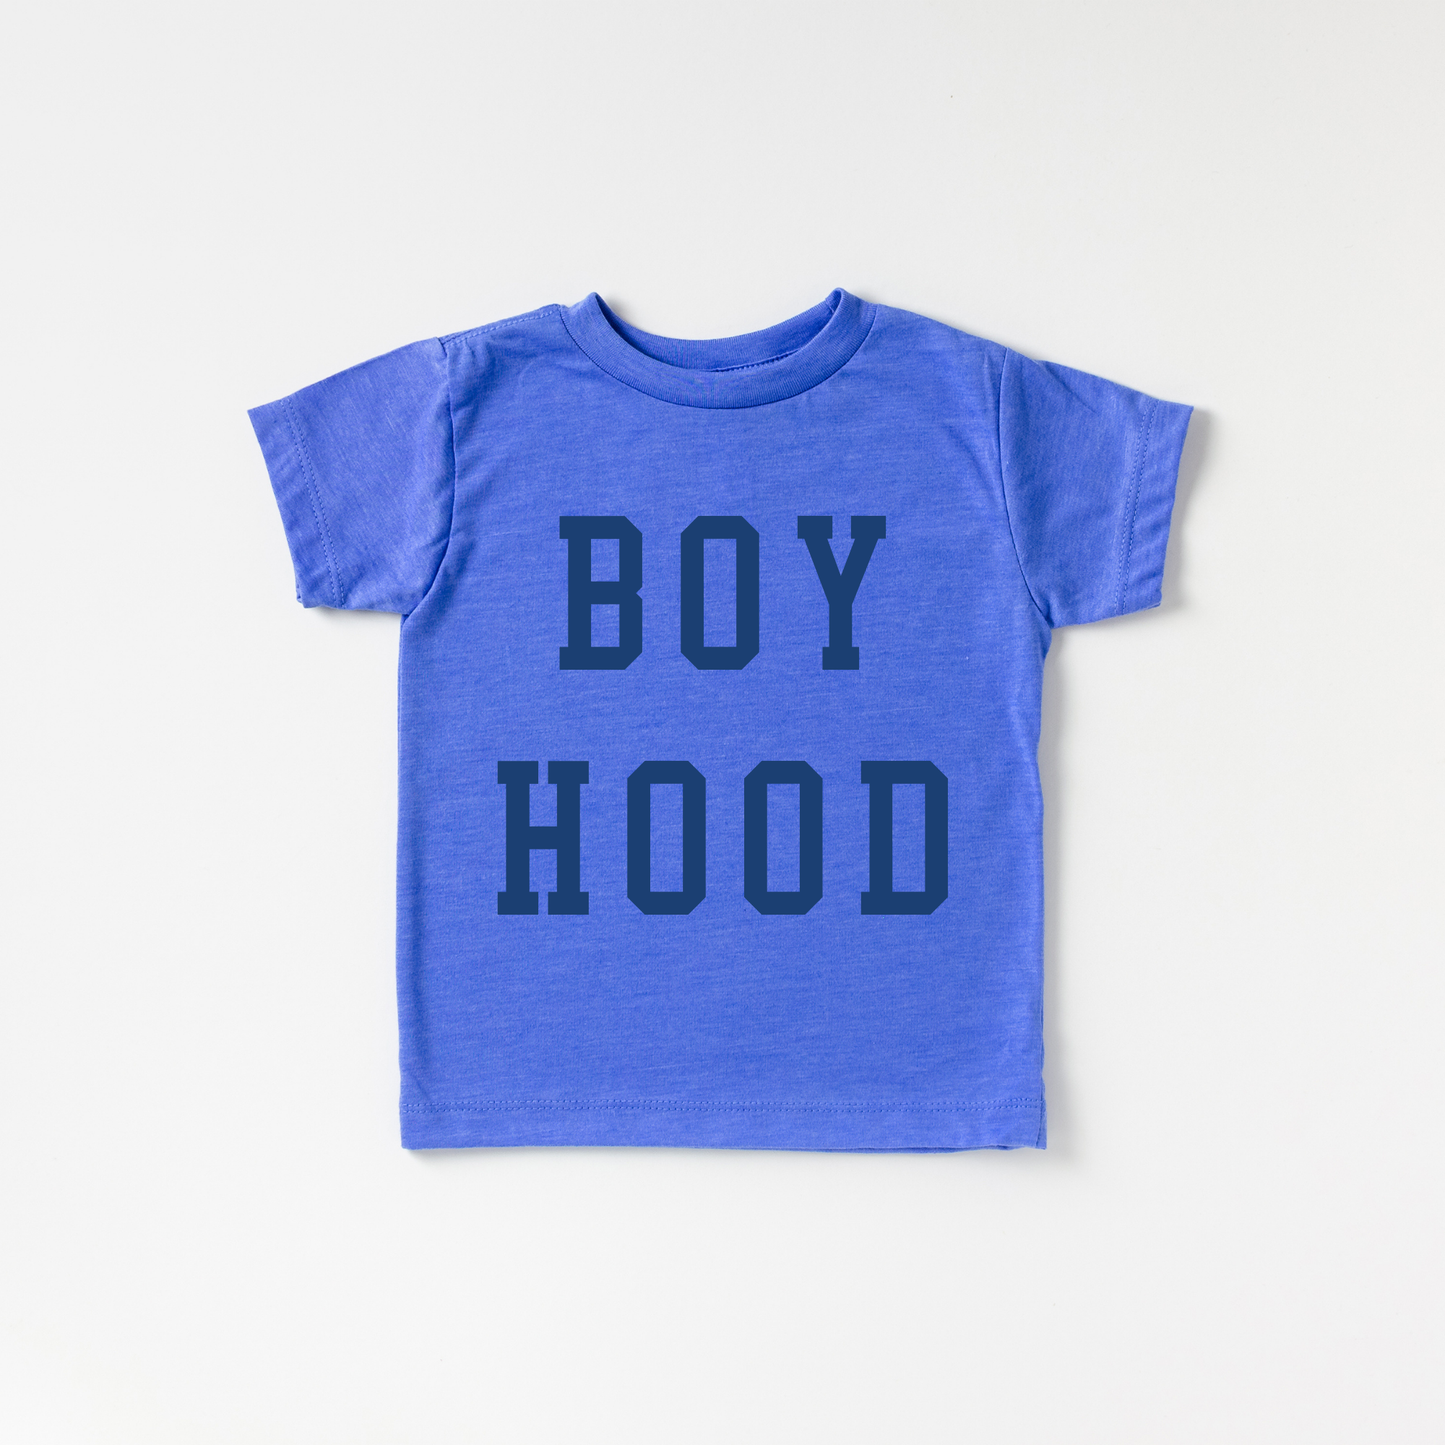 Boy Hood Toddler and Youth Shirt